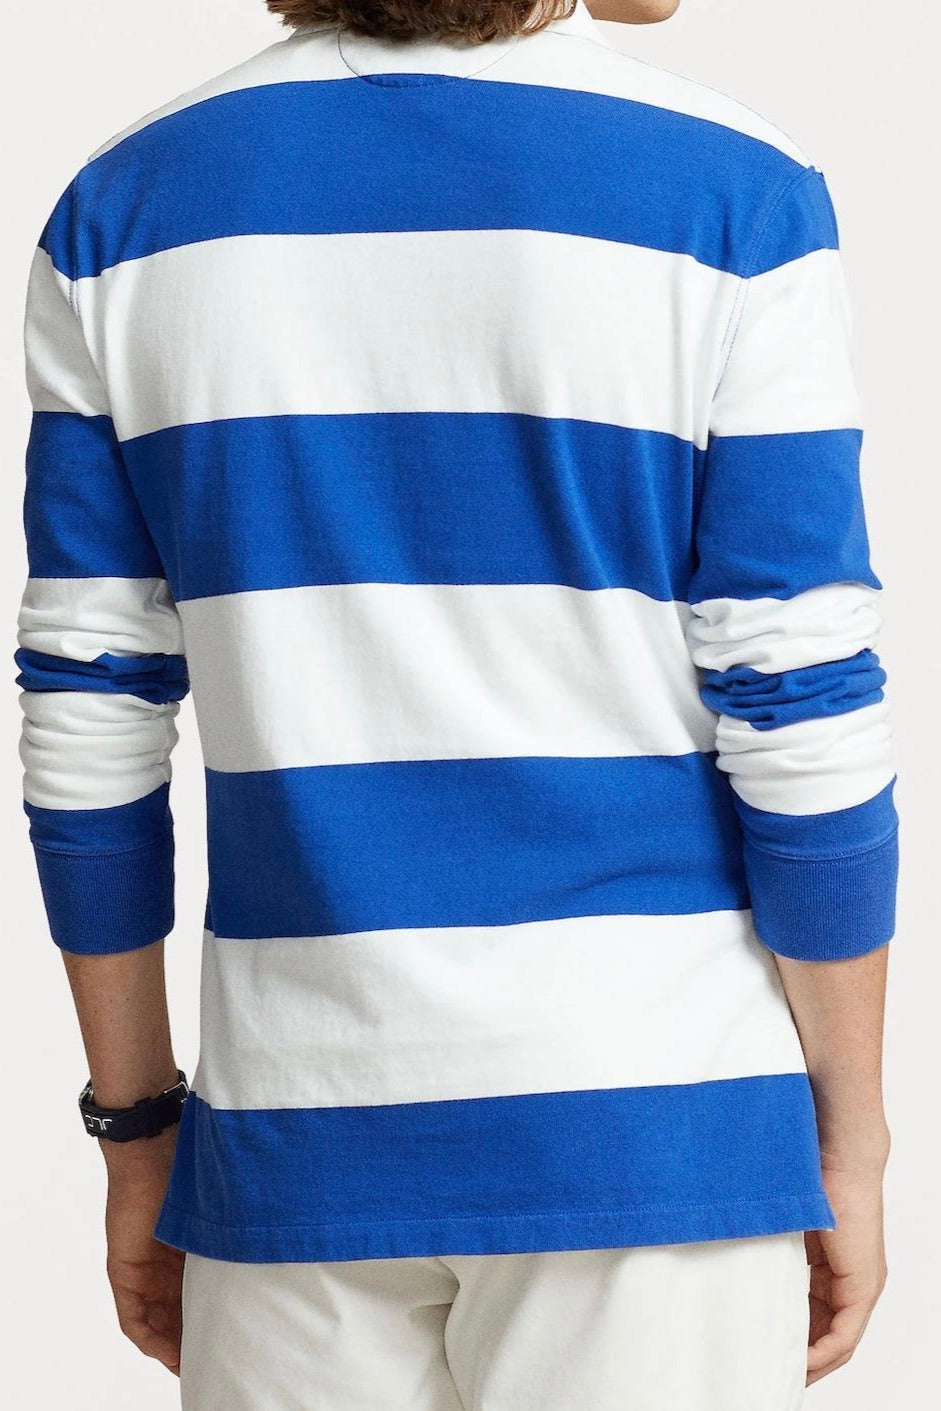 POLO RALPH LAUREN - Long Sleeve Rugby Shirt Stripe - Dale